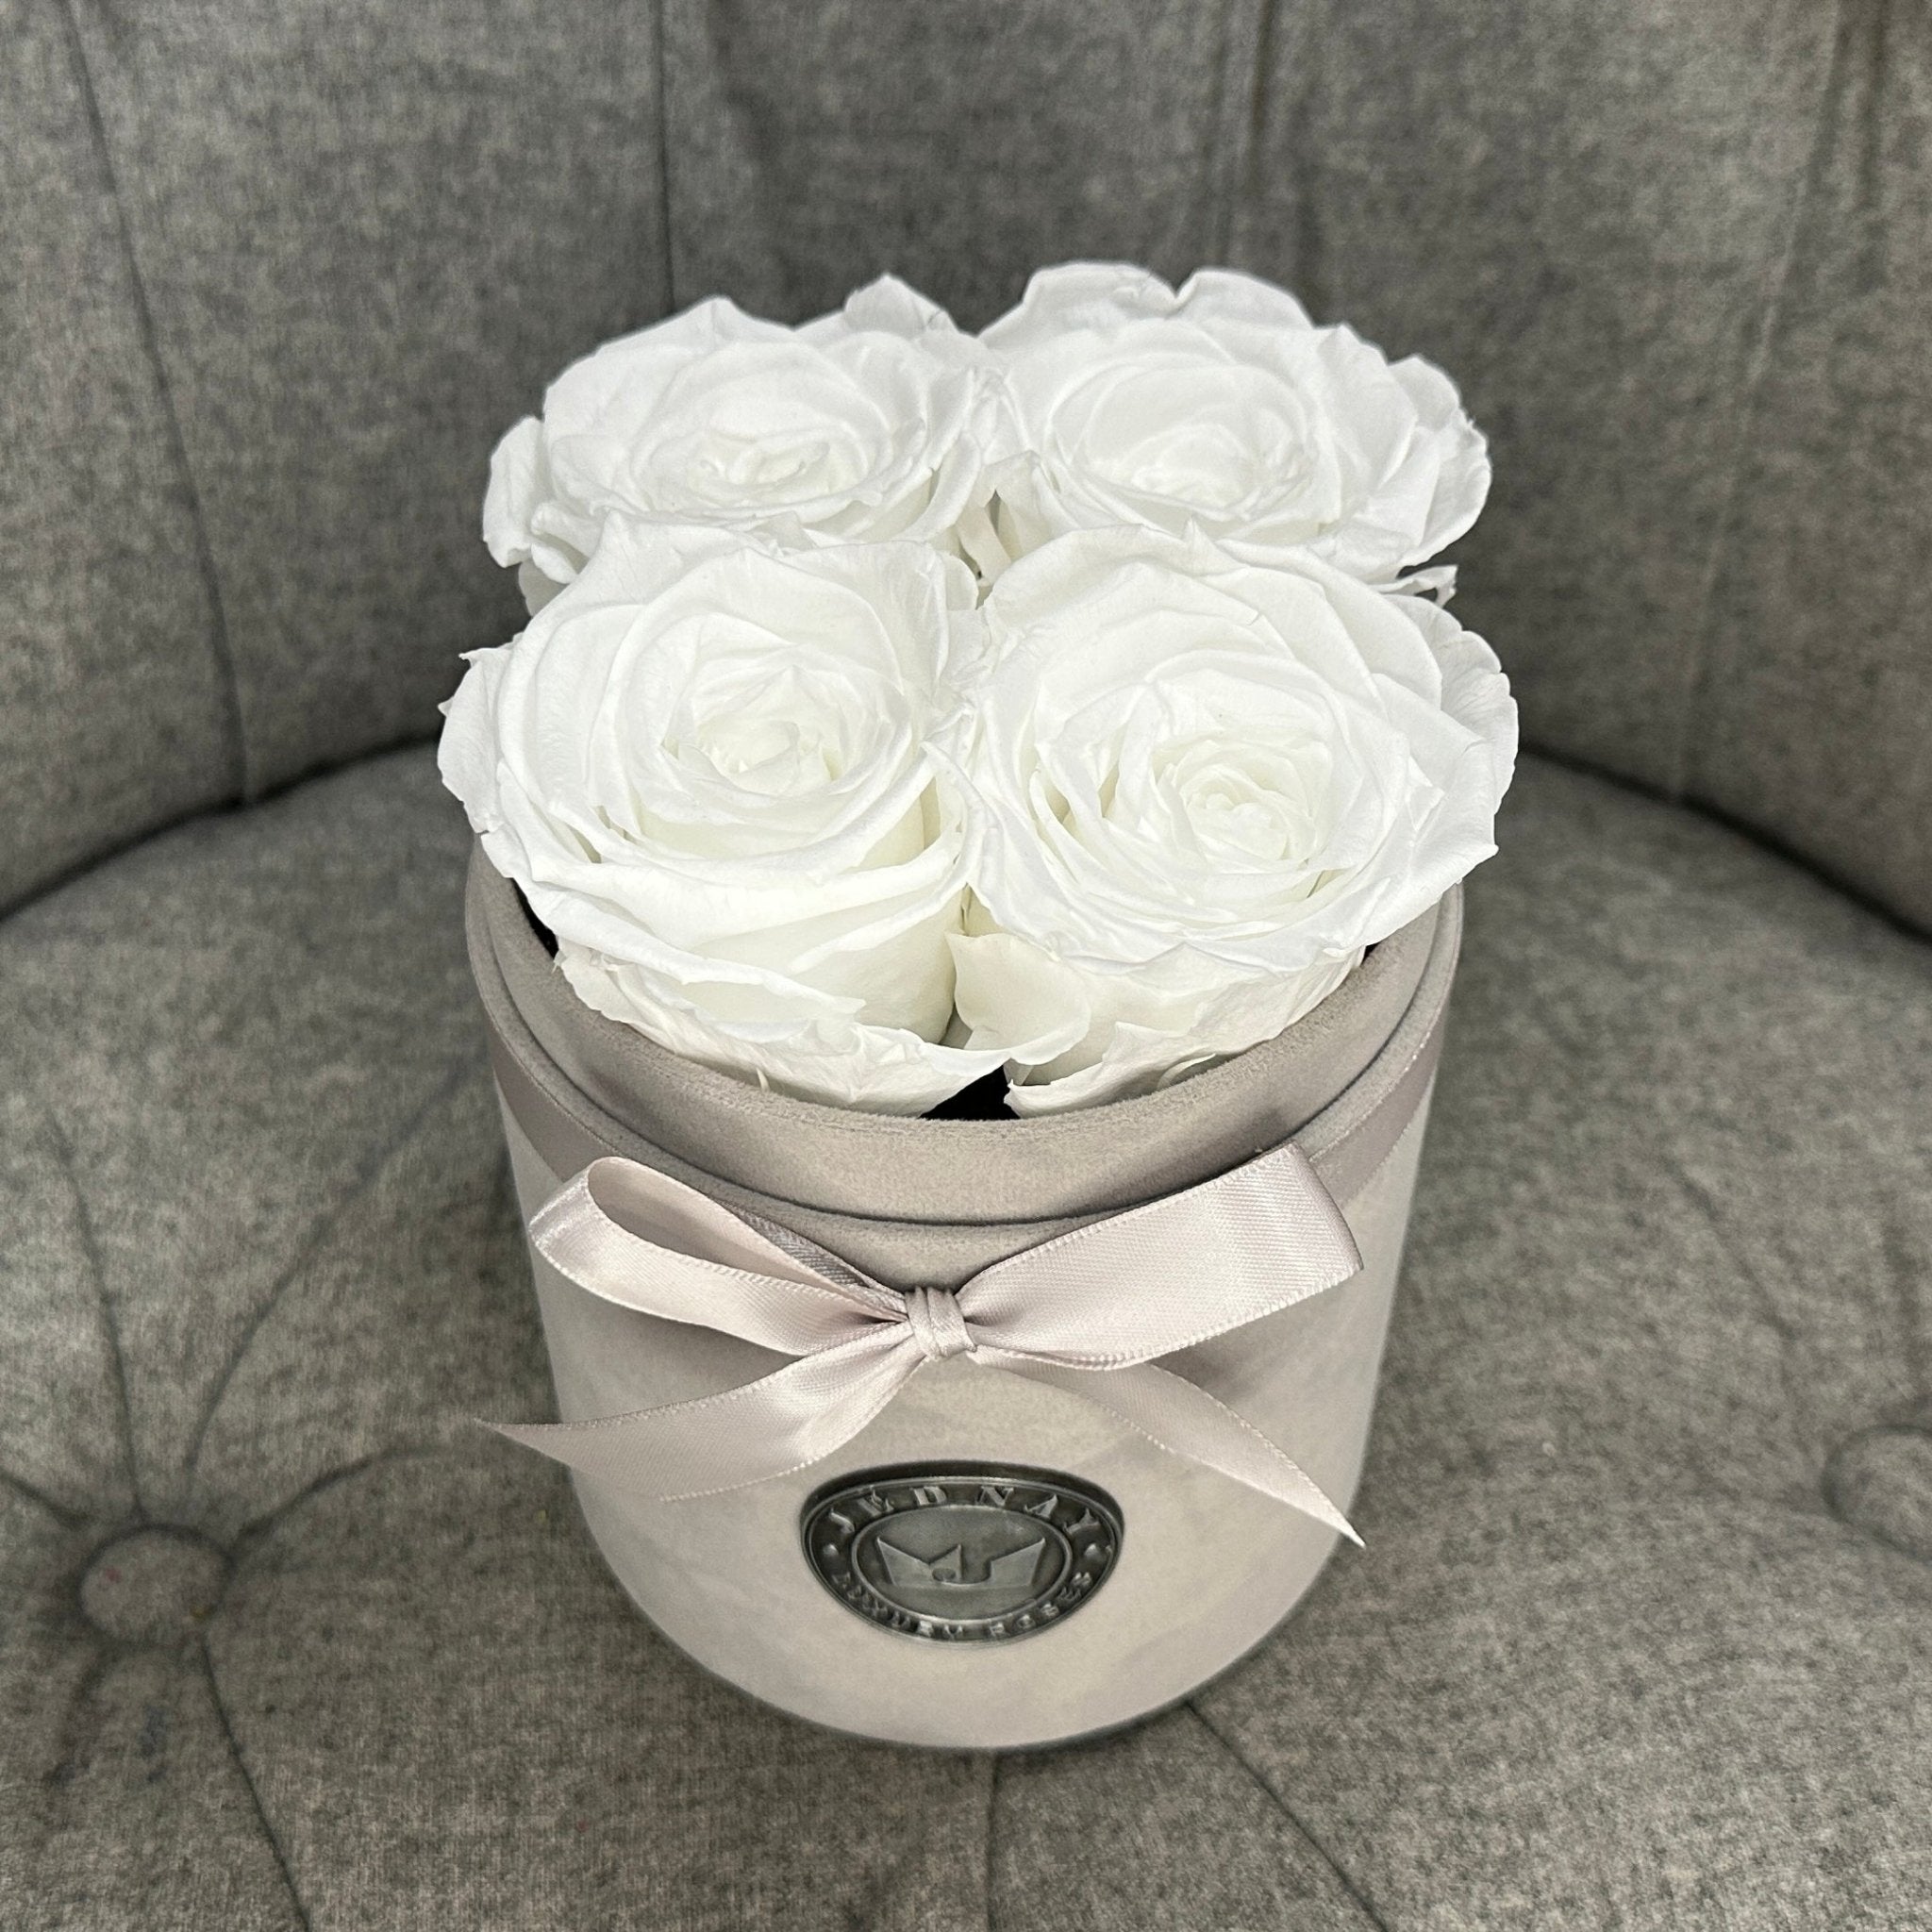 Petite Grey Suede Forever Rose Box - Angel White Eternal Roses - Jednay Roses